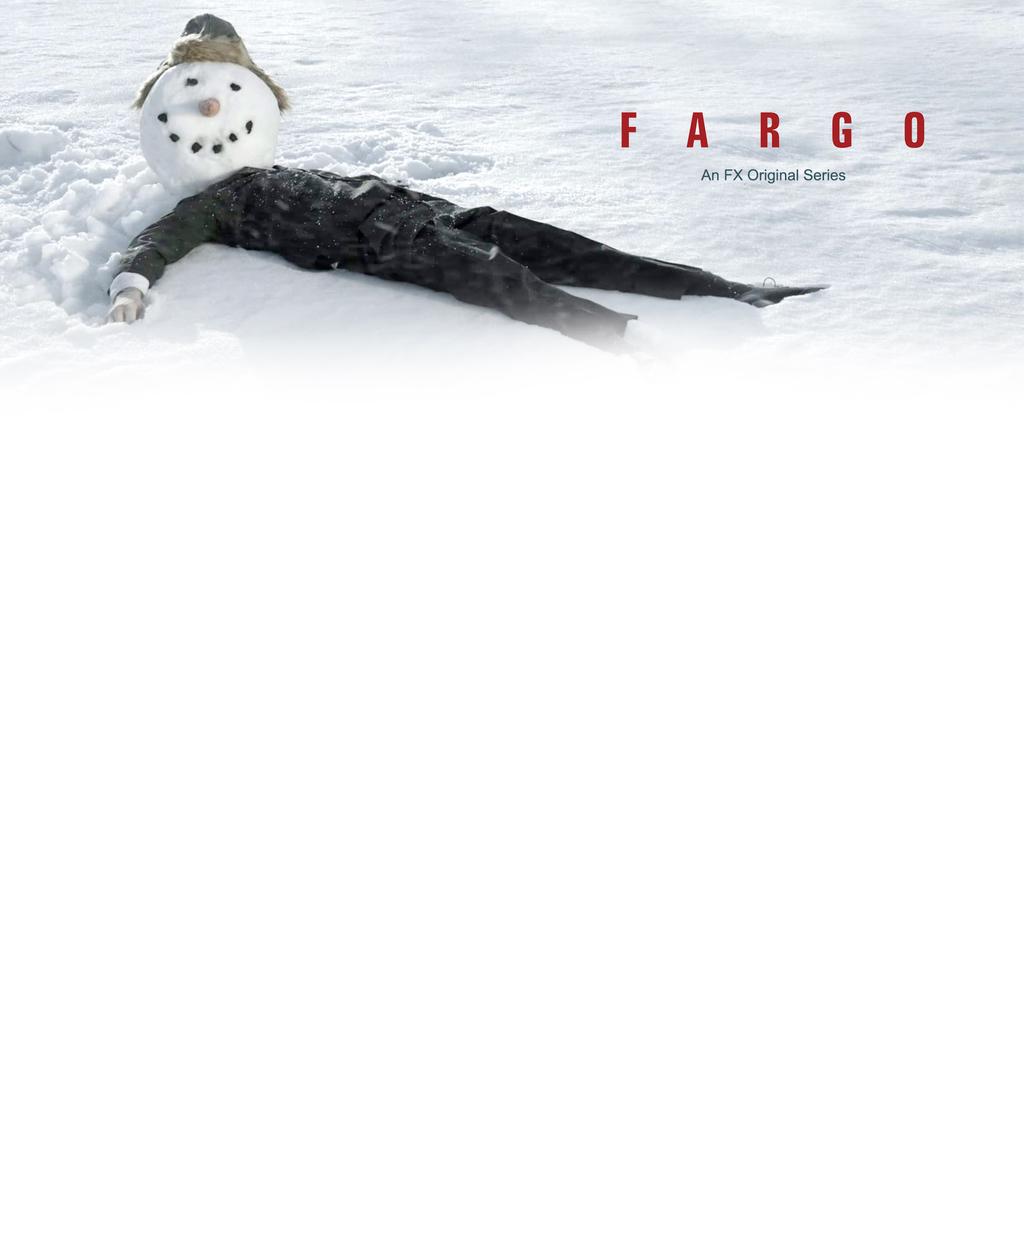 Outstanding Limited Series: Nominees this year include Fargo on FX, in its second season; (it won the award in its first season in 2014 and has 18 overall Emmy nominations this year).